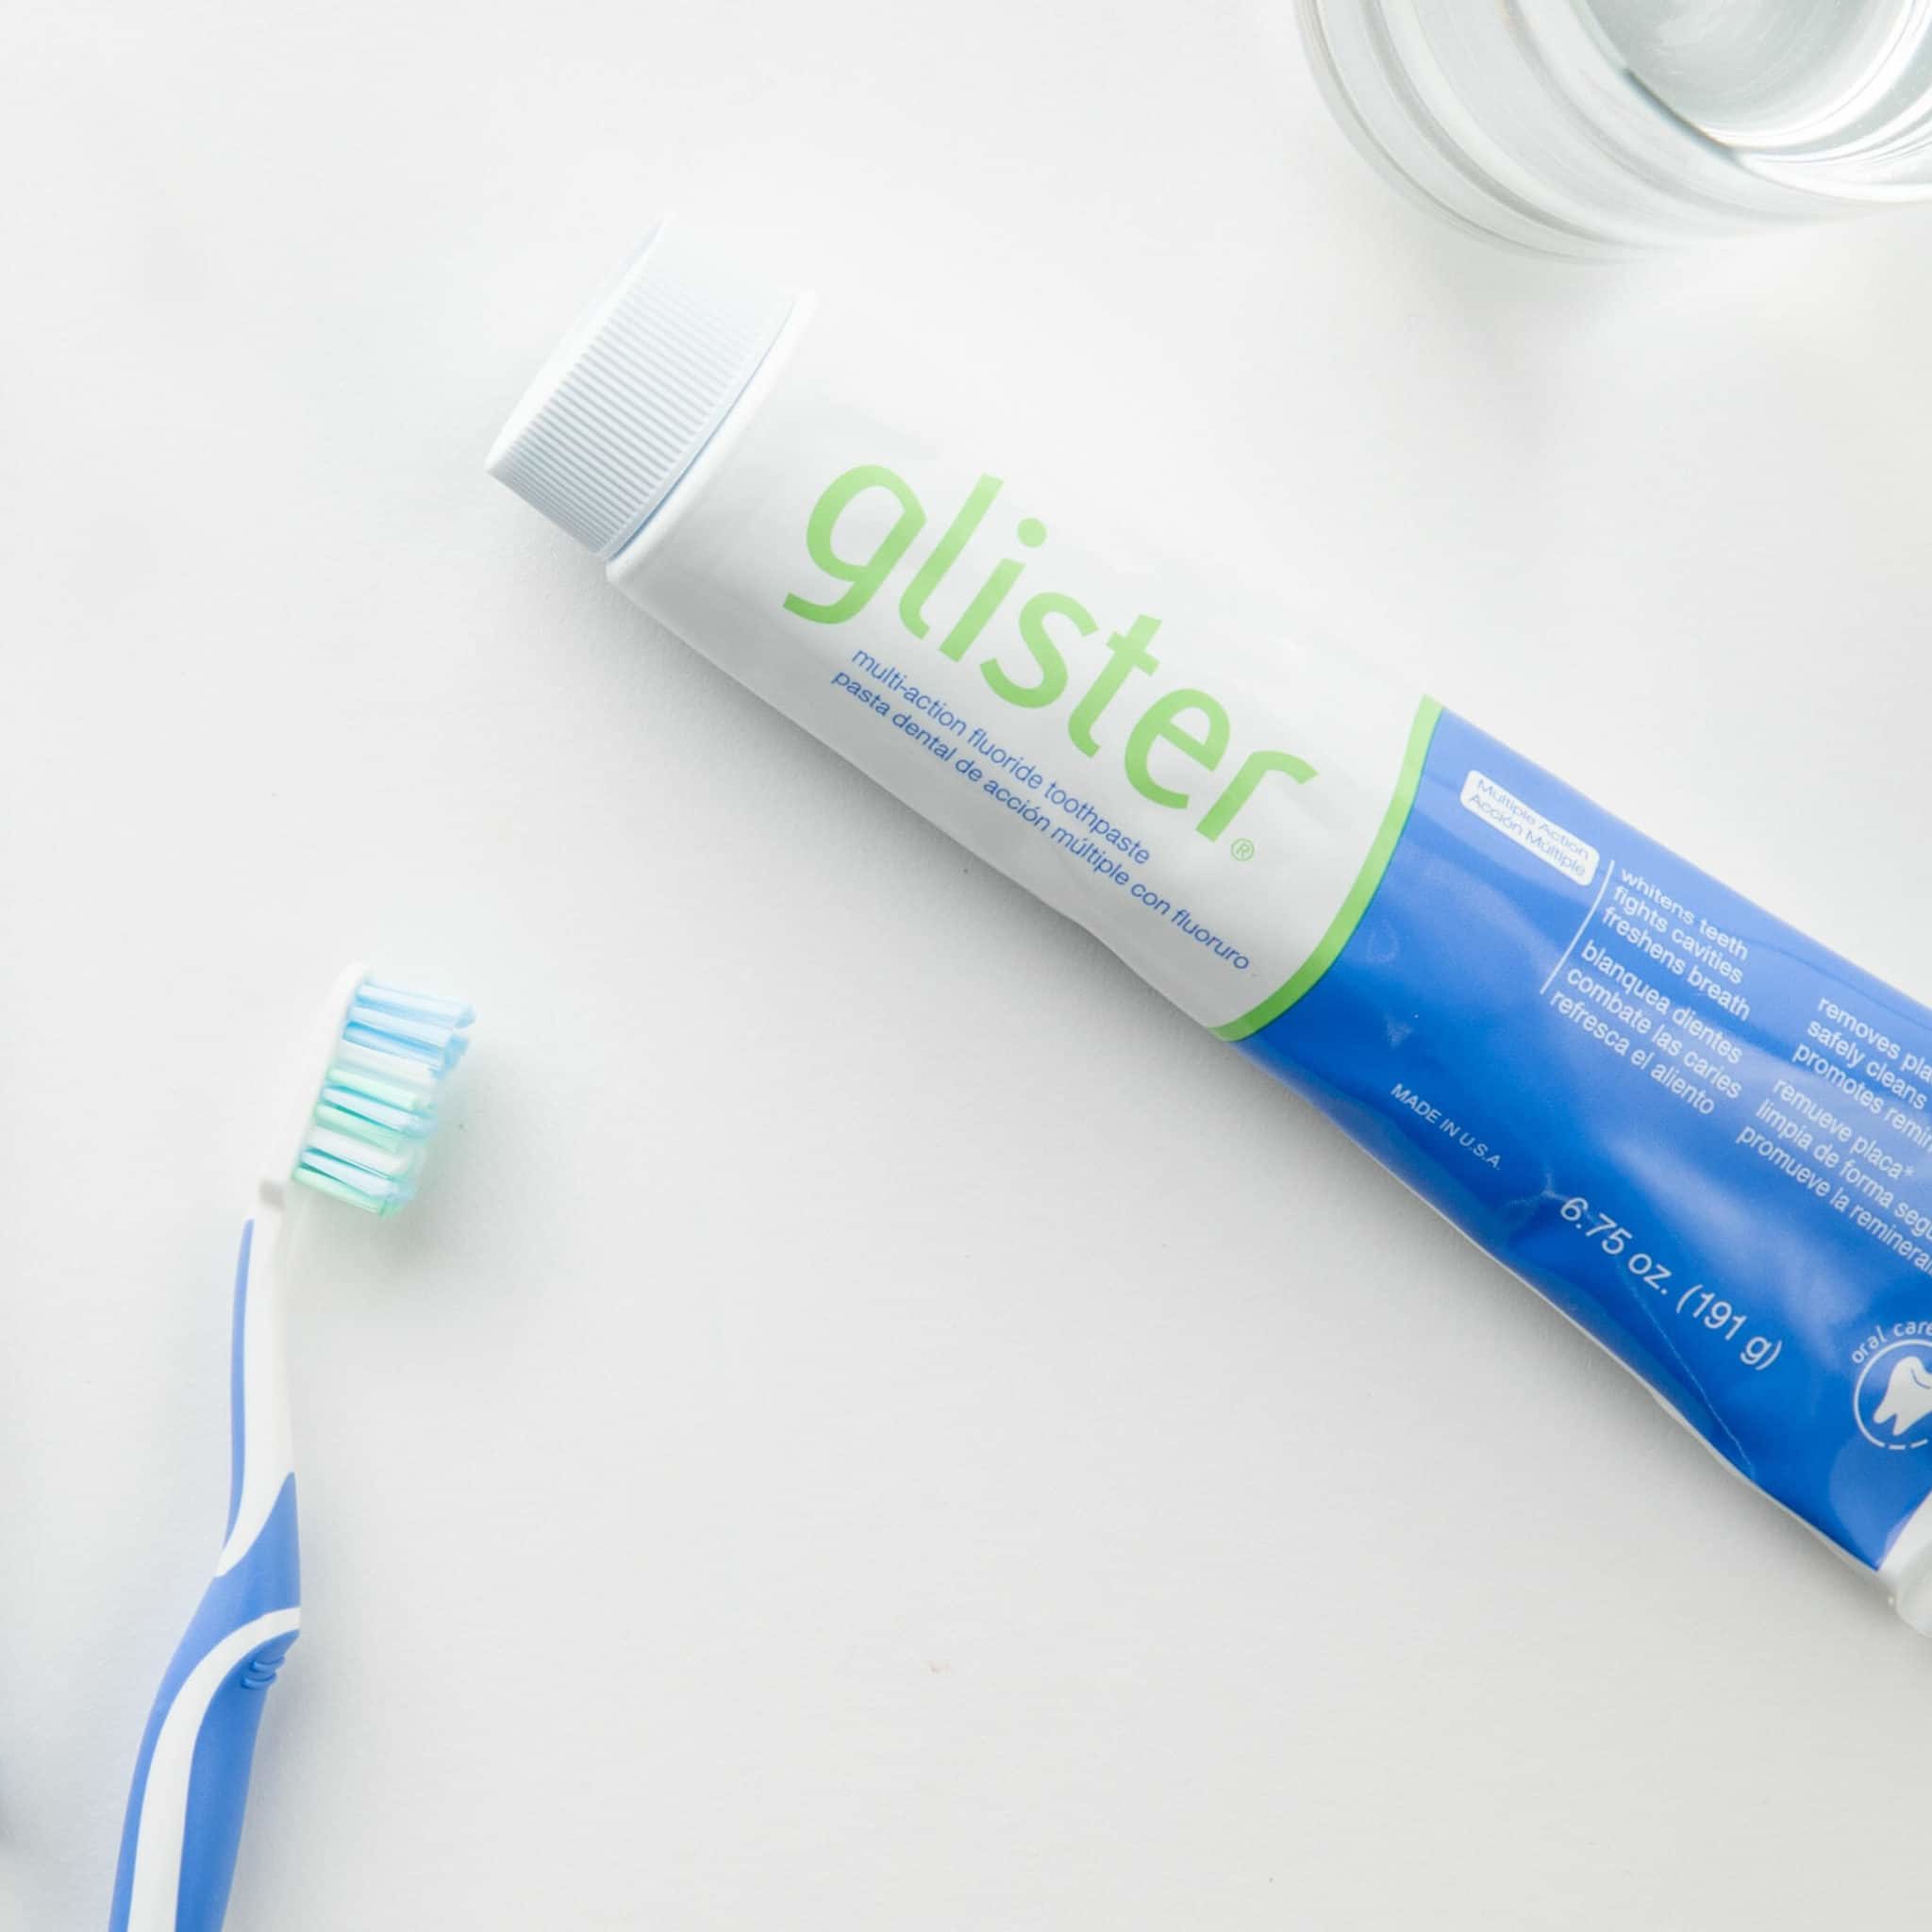 Glister Multi-Action Fluoride Toothpaste with Brush